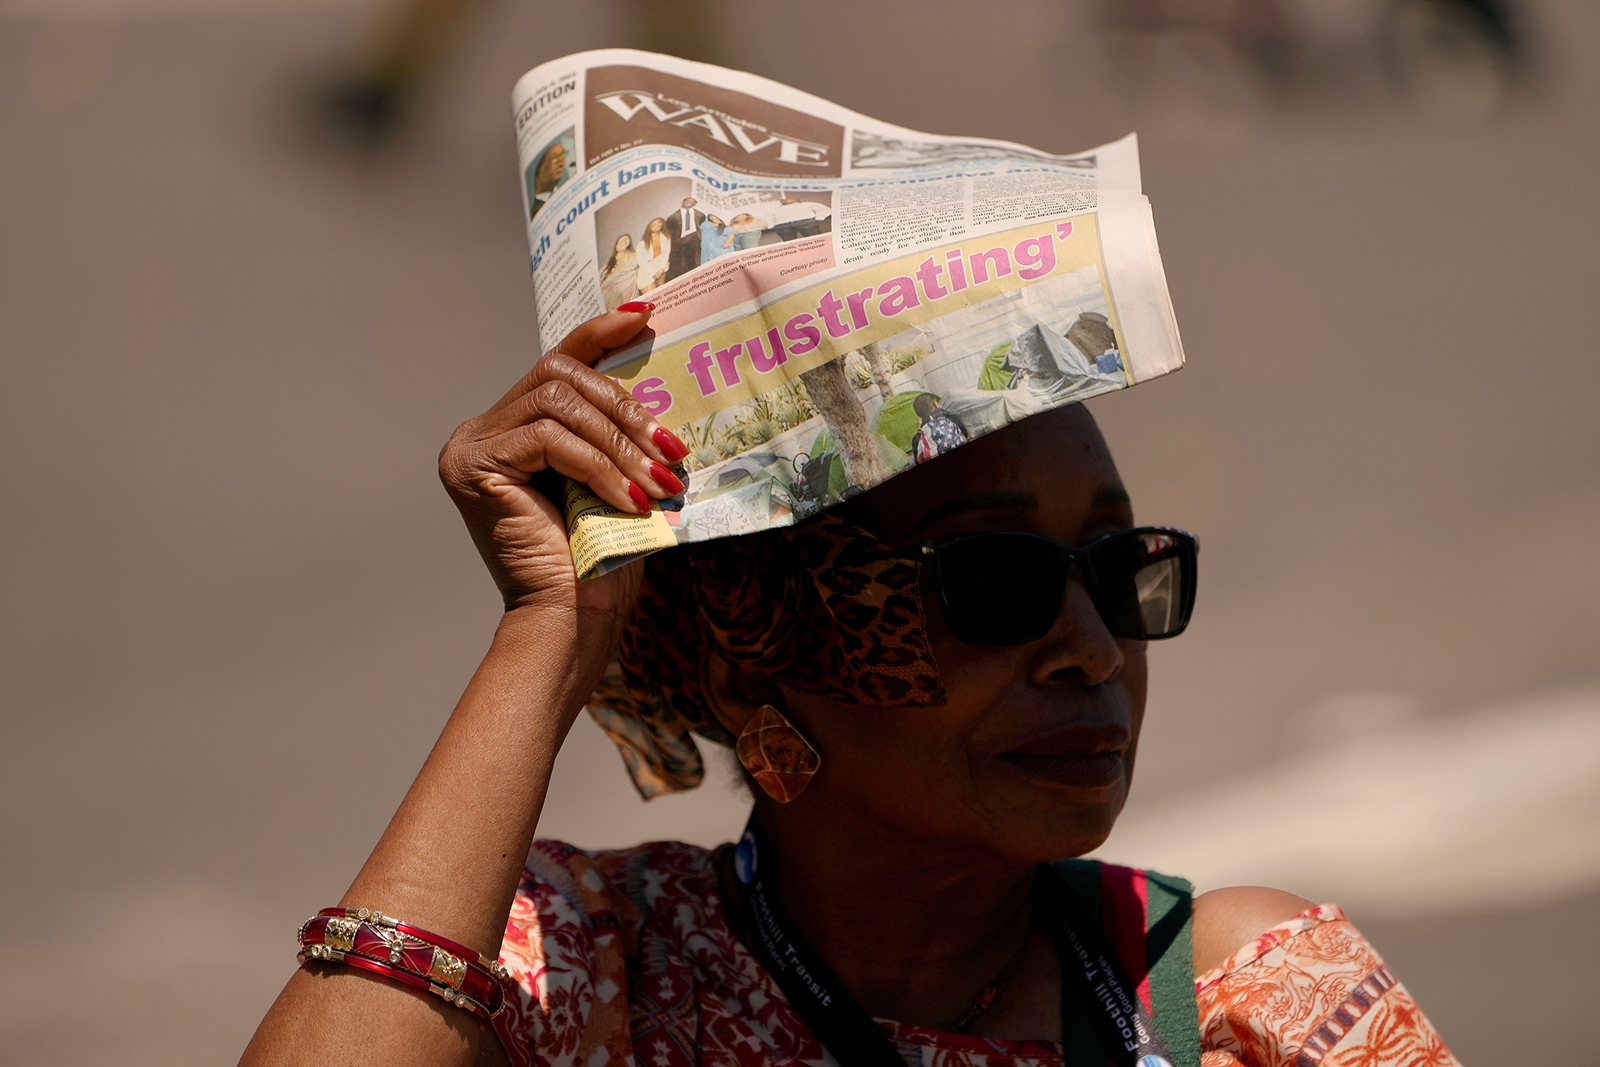 A woman shields herself from the sunlight with a newspaper in Los Angeles on July 15.